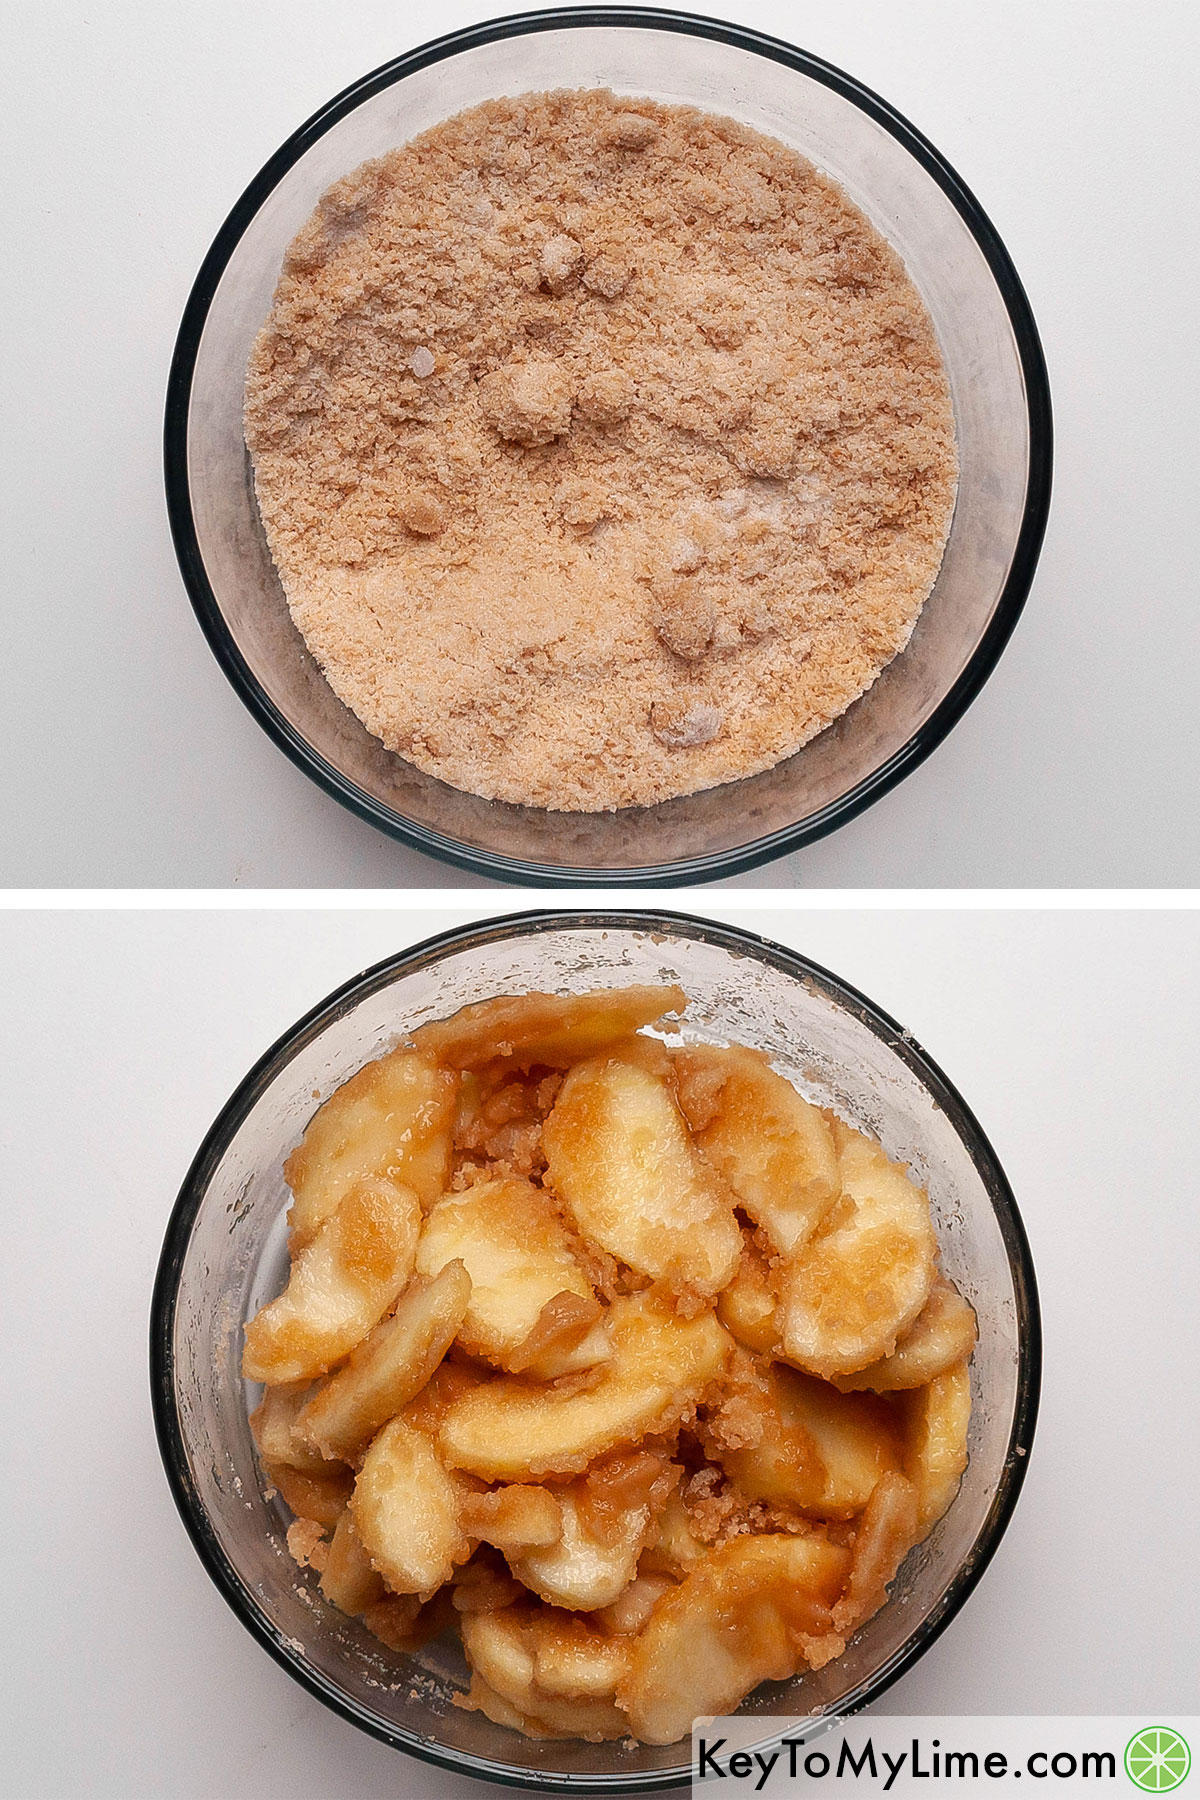 Combining sugar and brown sugar, then coating apple slices in the sugar mixture.